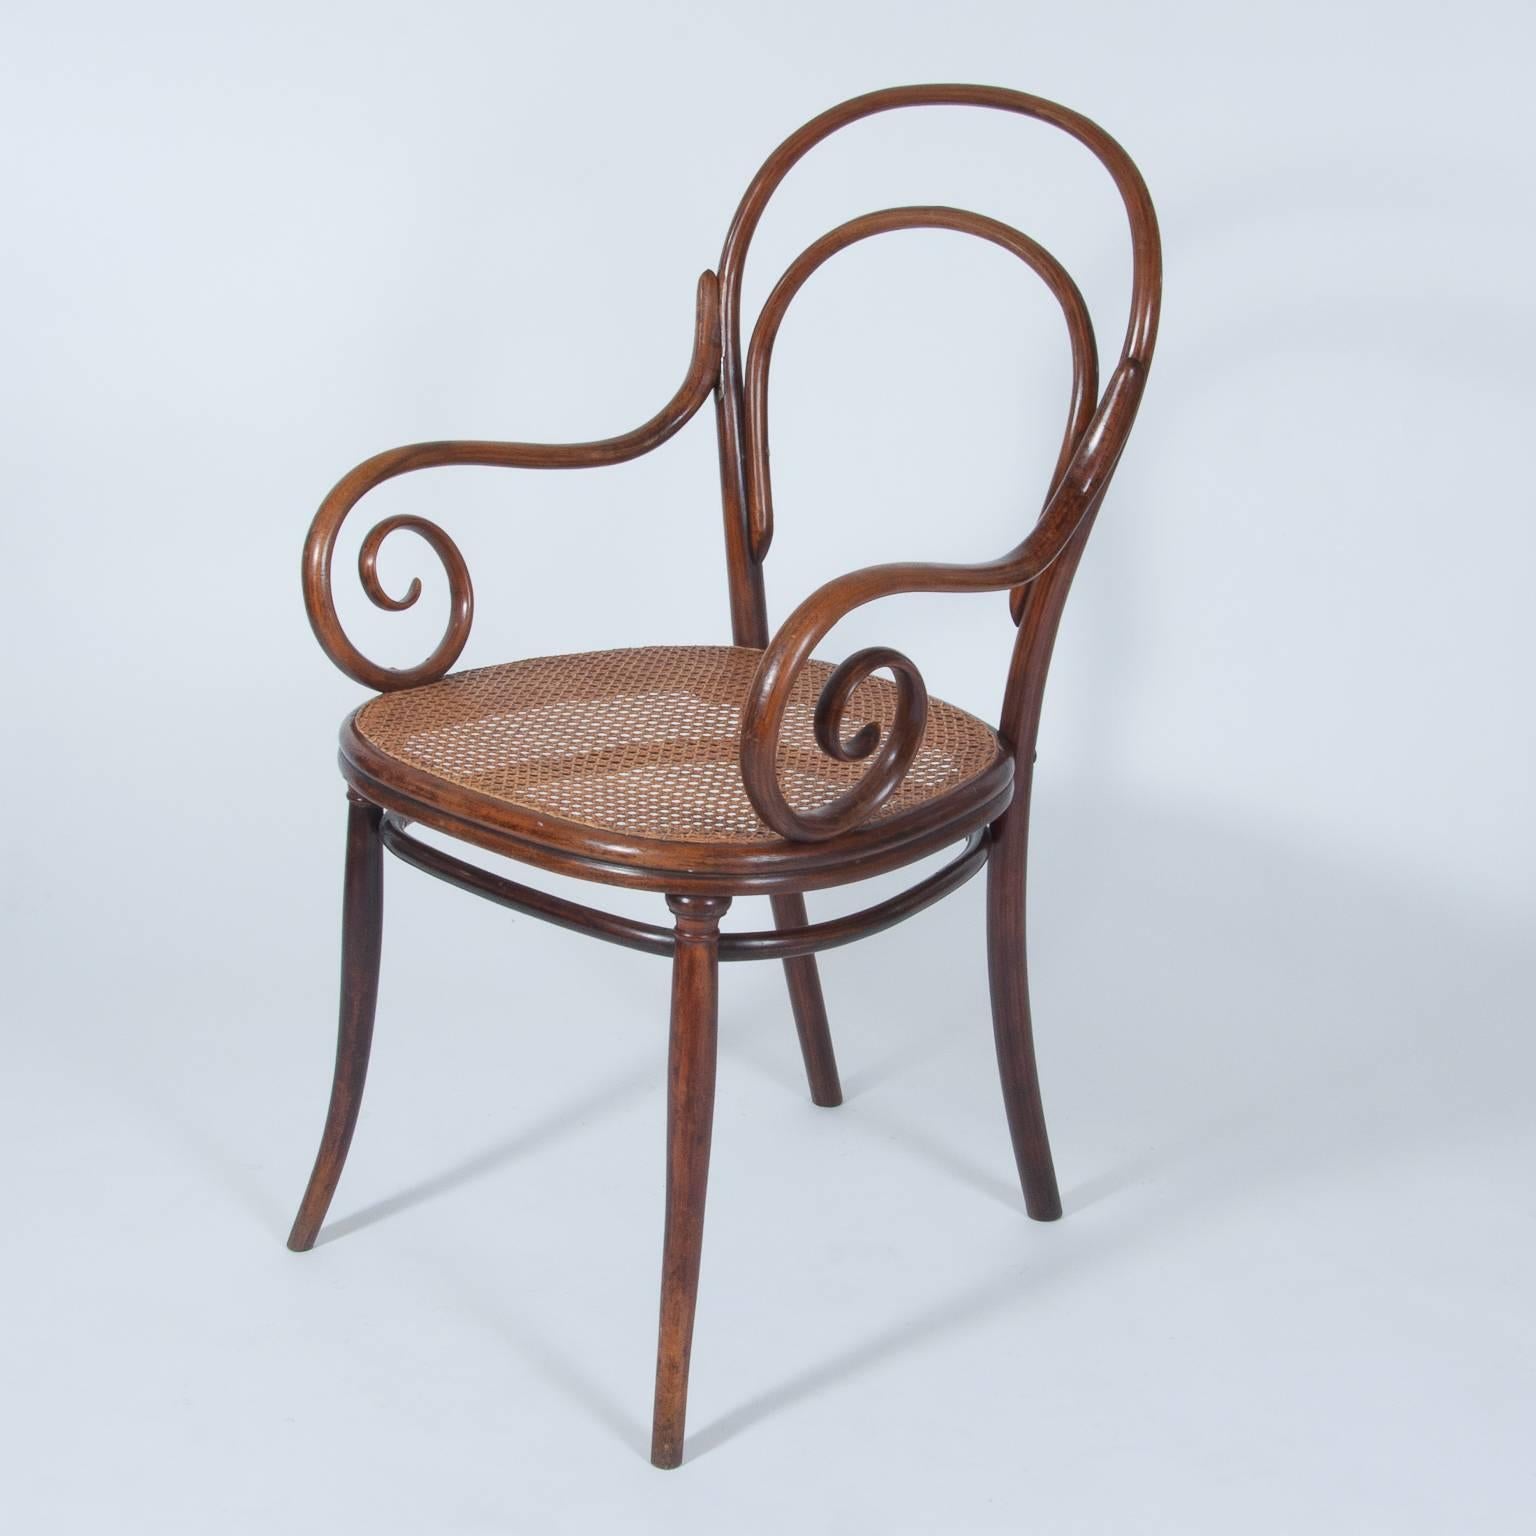 Antique Thonet bentwood armchair fauteuil no. 2, designed 1868, manufactured 1885.
An extraordinary piece of furniture; armchair, show piece, side chair or even dining chair.

One of very the hard to find Thonet model no. 11.
Armrest fixed w/